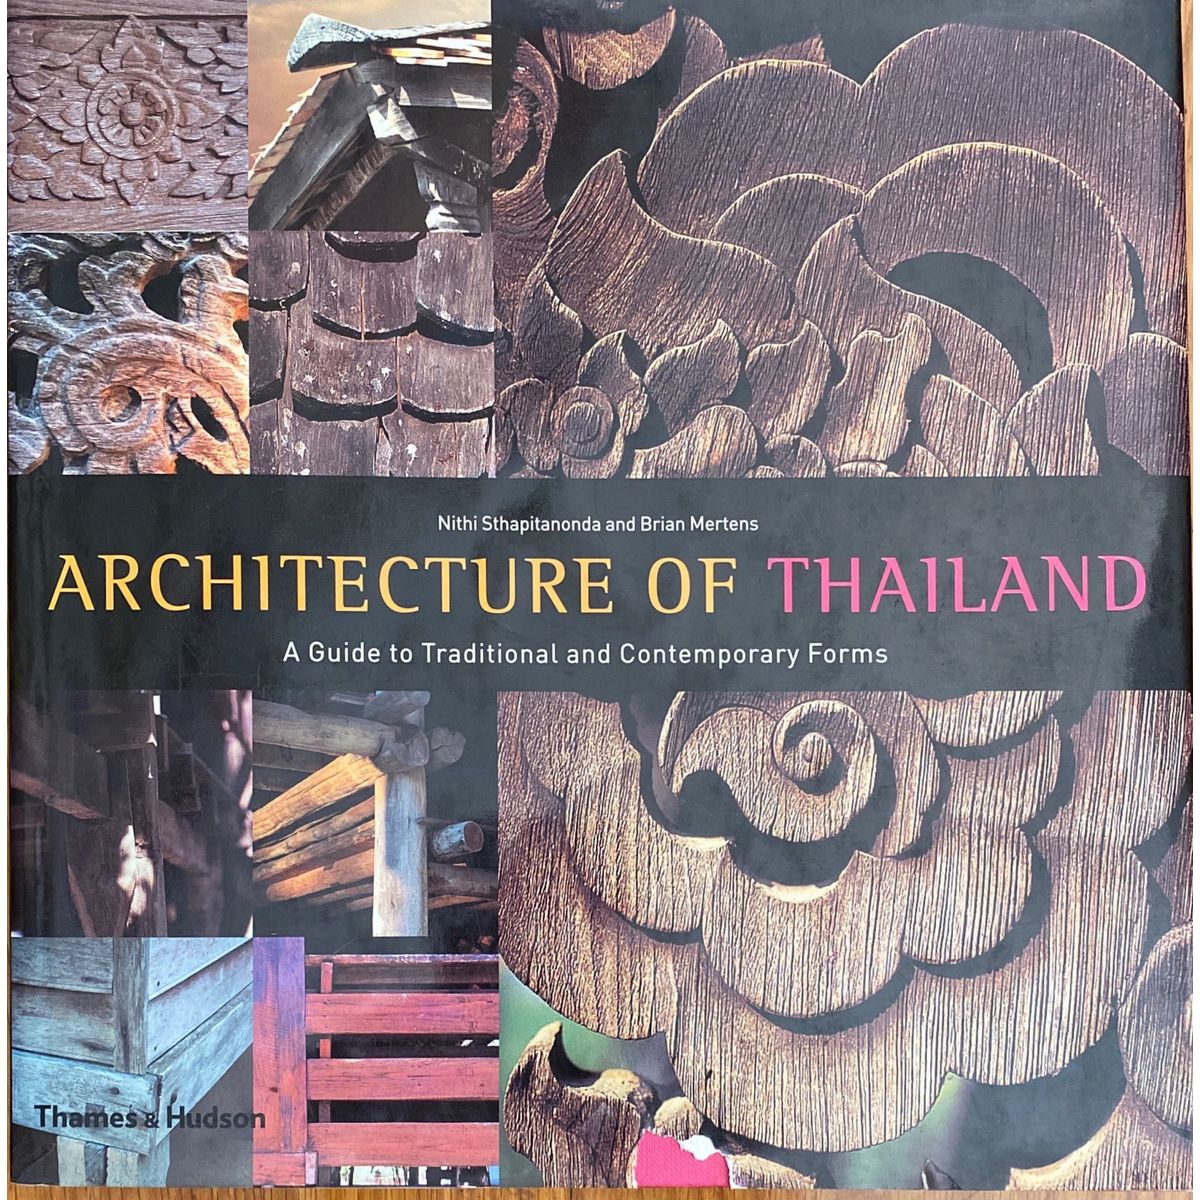 ISBN: 9780500342237 / 0500342237 - Architecture of Thailand: A Guide to Traditional and Temporary Forms by Nithi Sthapitanonda and Brian Mertens [2006]